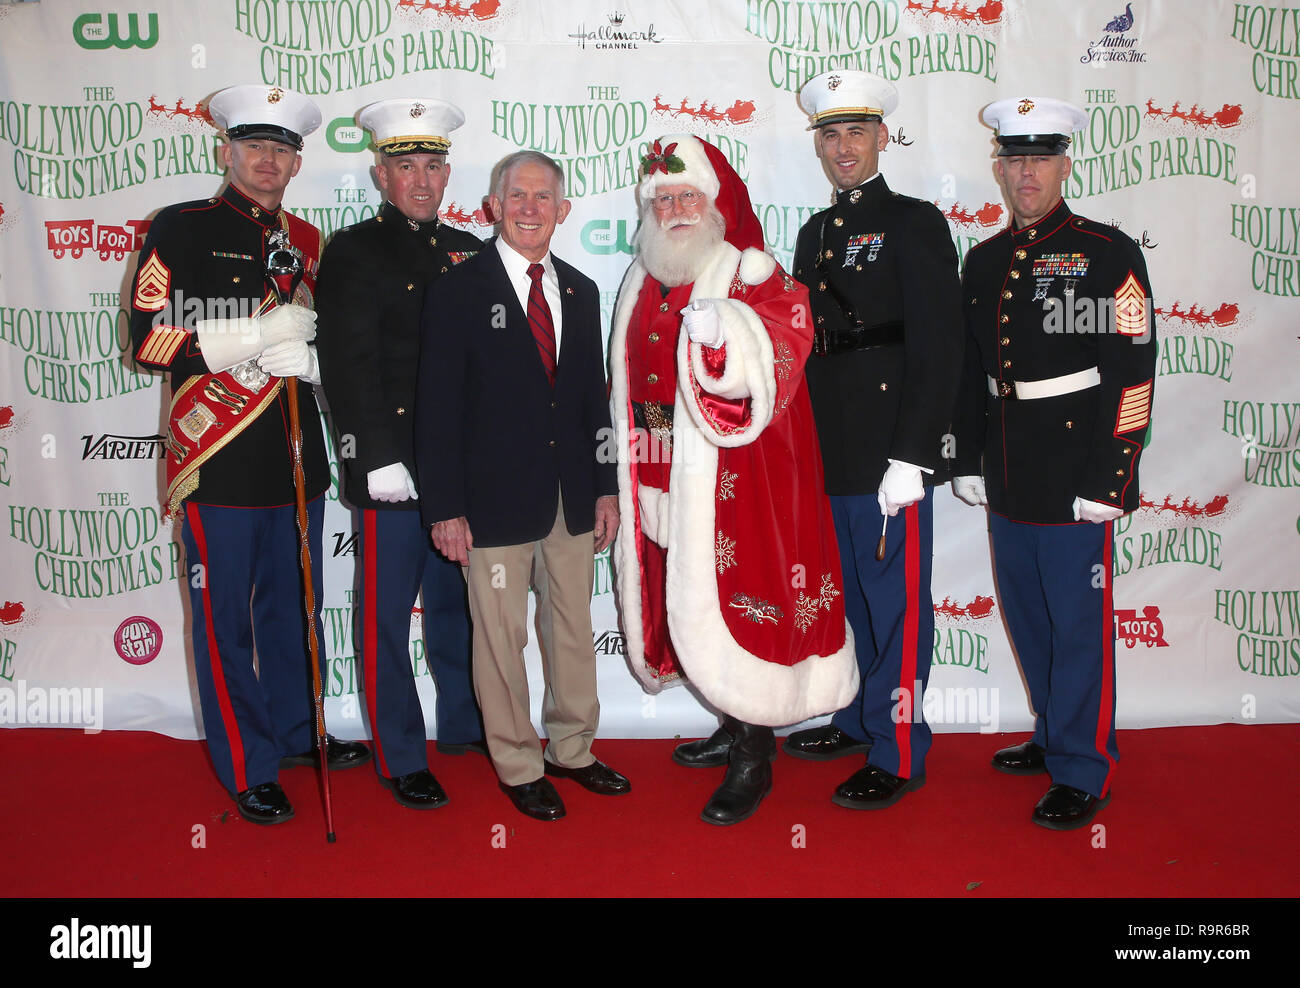 87th Annual Hollywood Christmas Parade  Featuring: Lieutenant General Pete Osman, Lieutenant Colonel Matthew McDonald, First Sergeant Bill Holodnak, Santa Claus Where: Hollywood, California, United States When: 25 Nov 2018 Credit: FayesVision/WENN.com Stock Photo